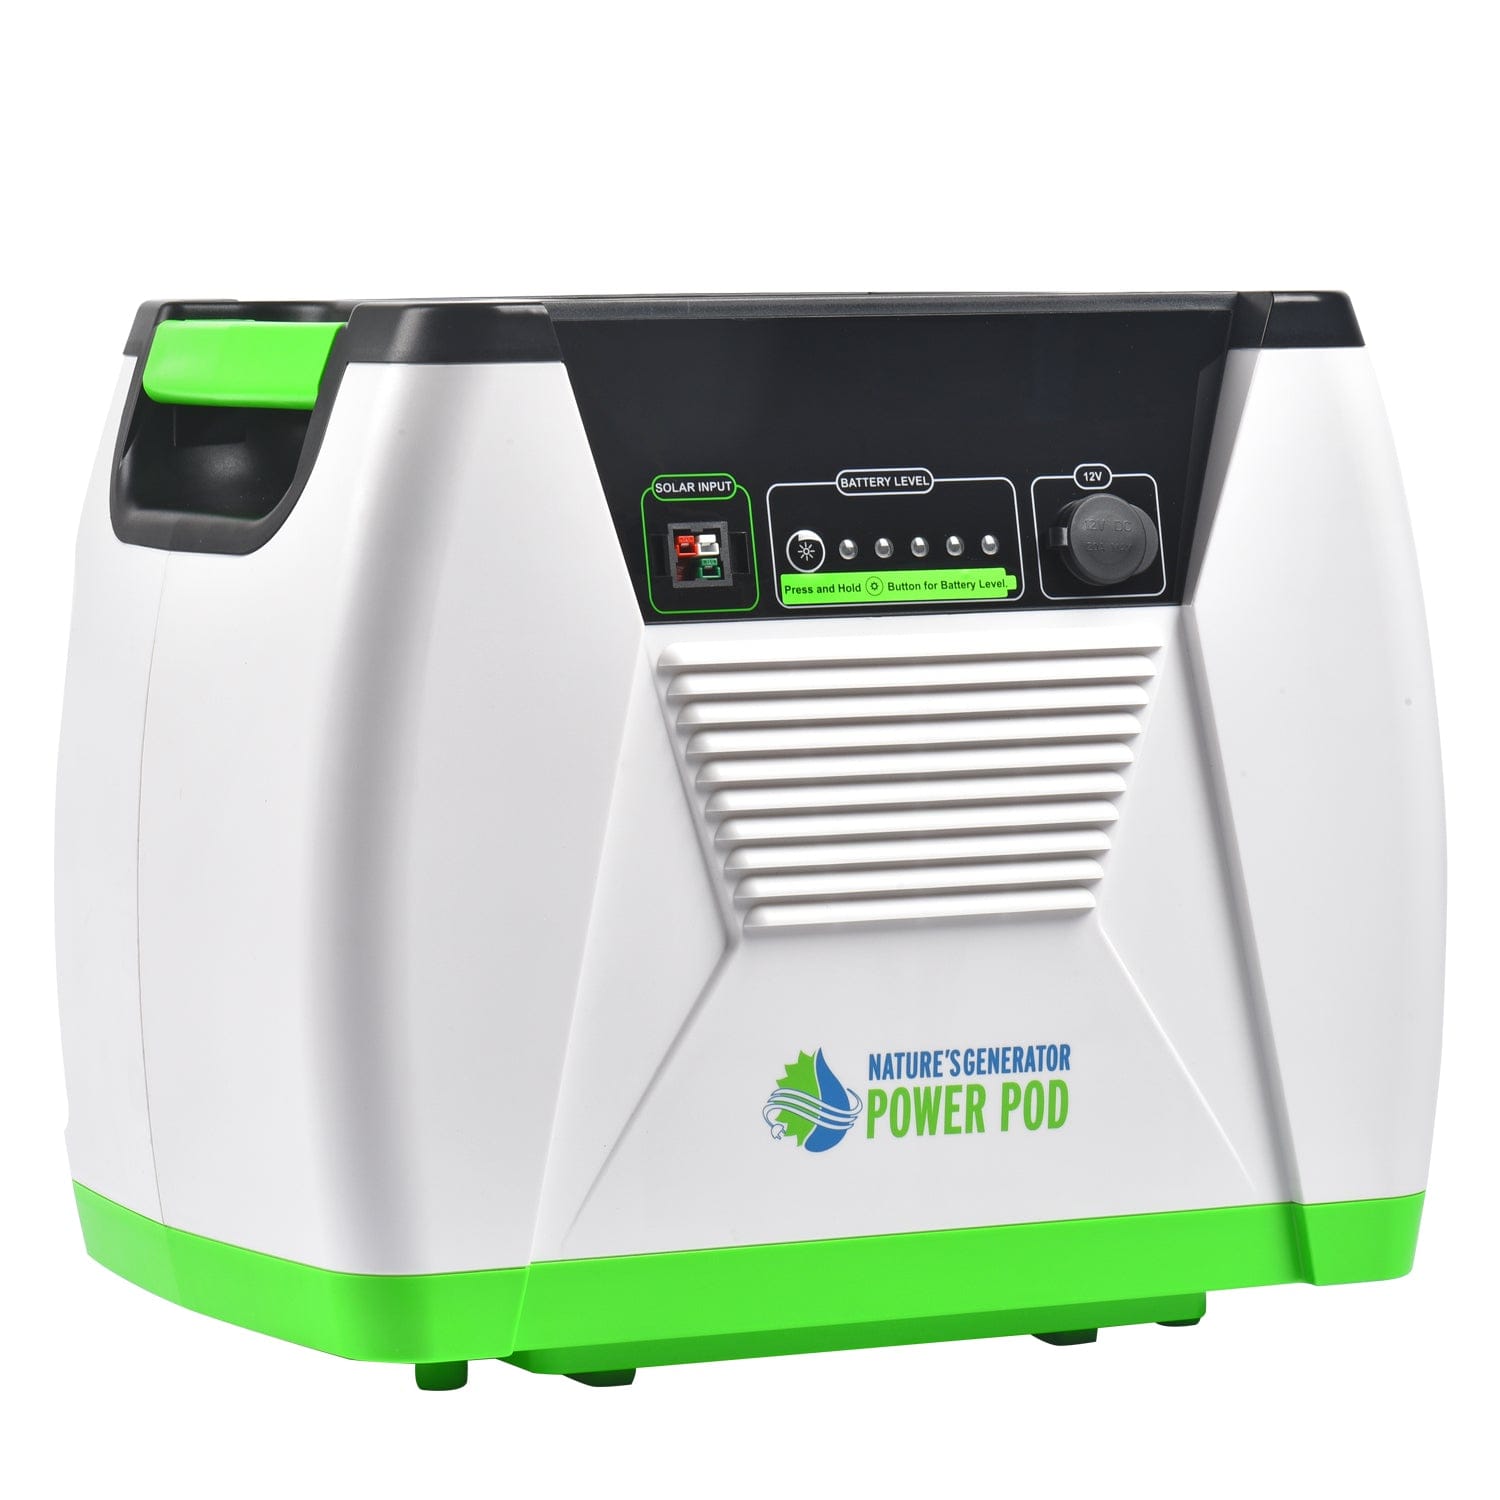 Nature's Generator 1800W Power Pod Side View